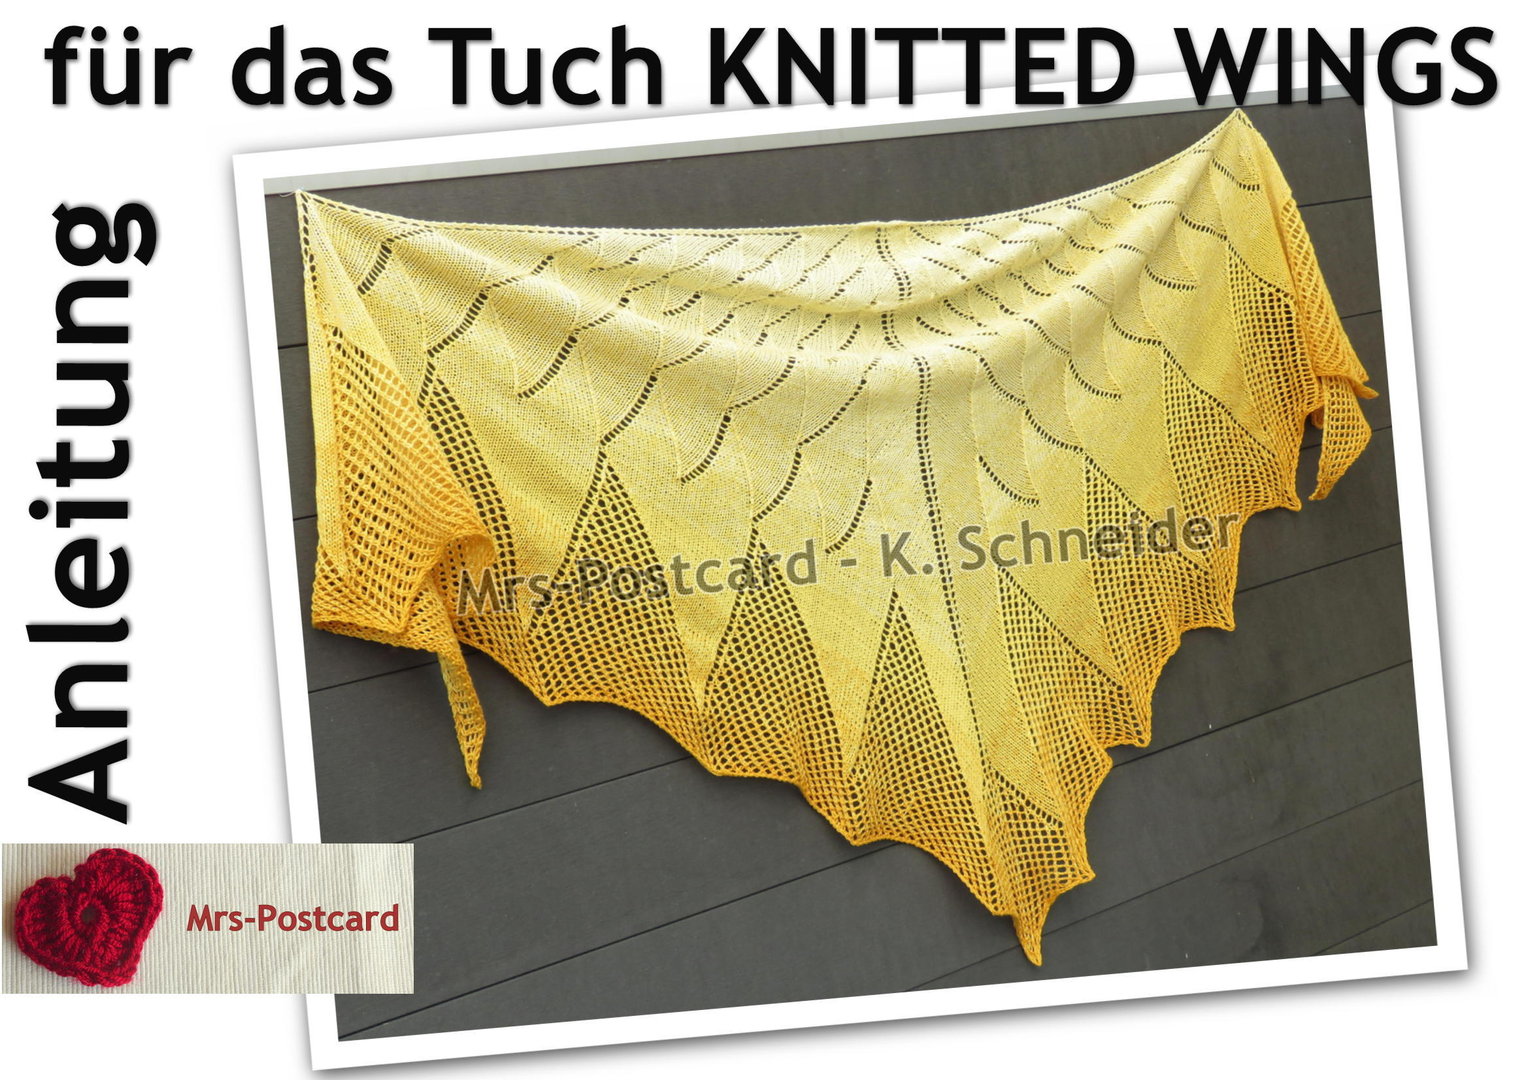 KNITTED WINGS Tuch  -  Anleitung